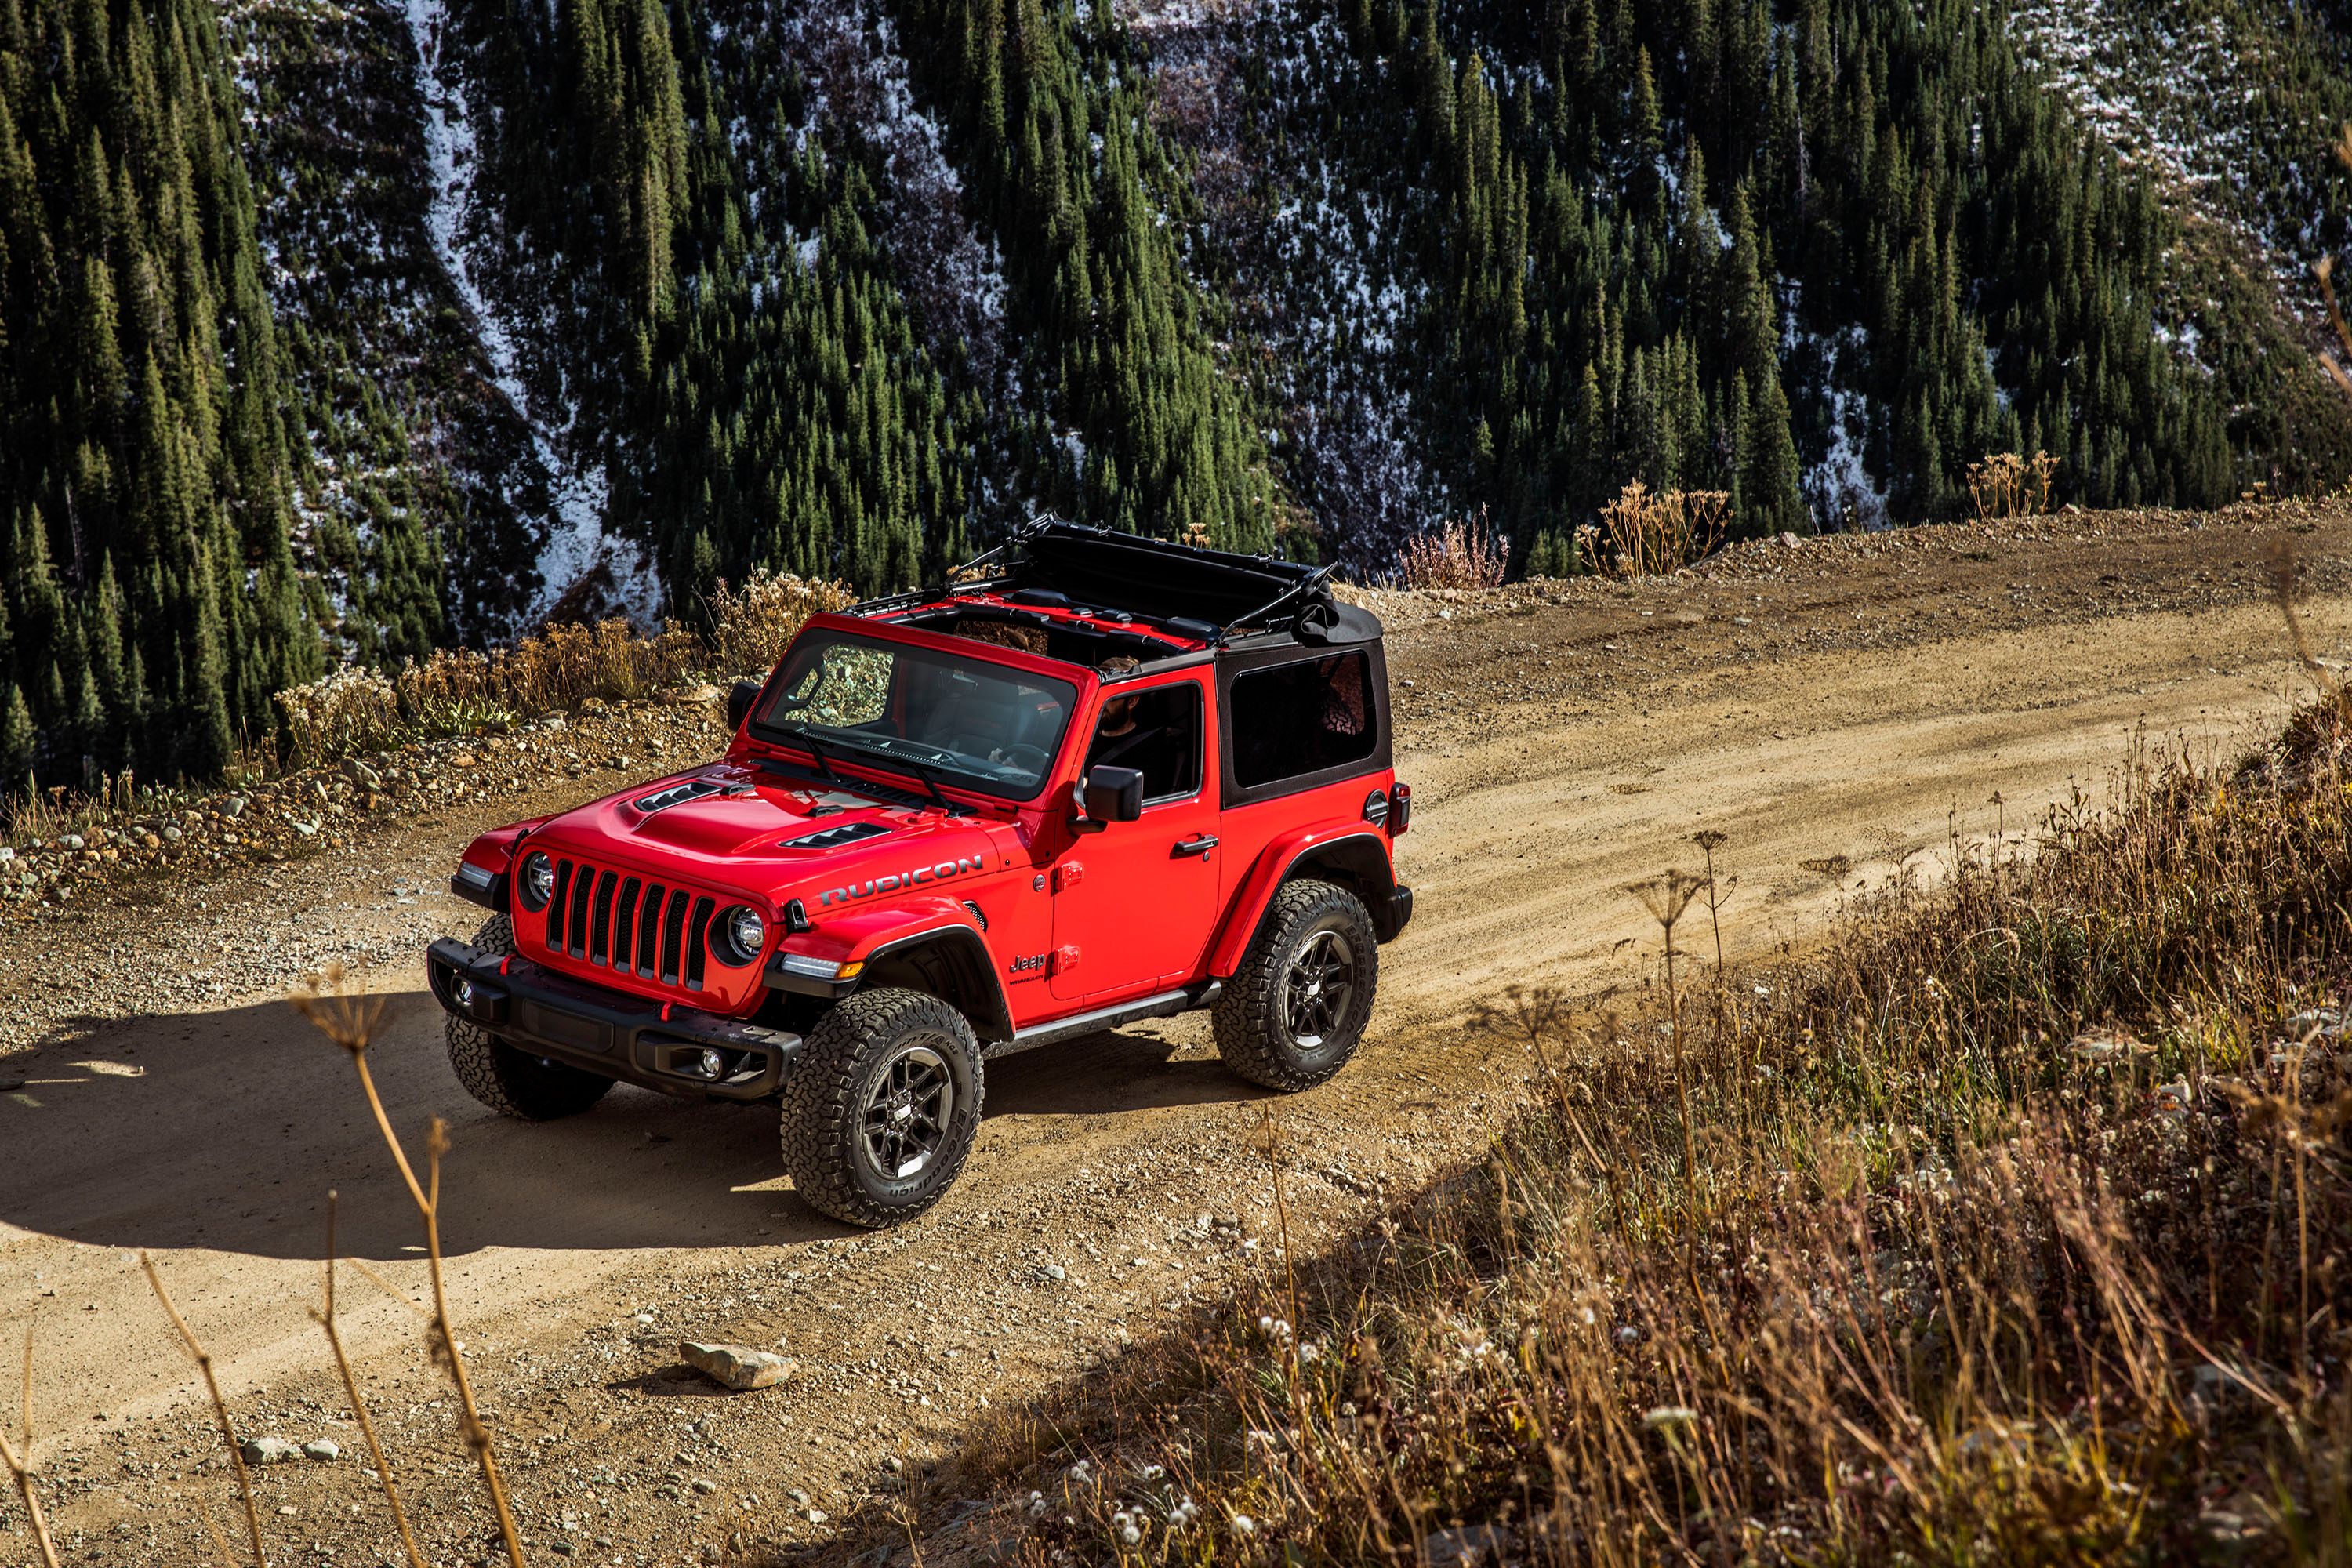 2019 You Can Now Order the 2020 Jeep Wrangler JL With a Diesel, But The Cost Is Almost Unbearable